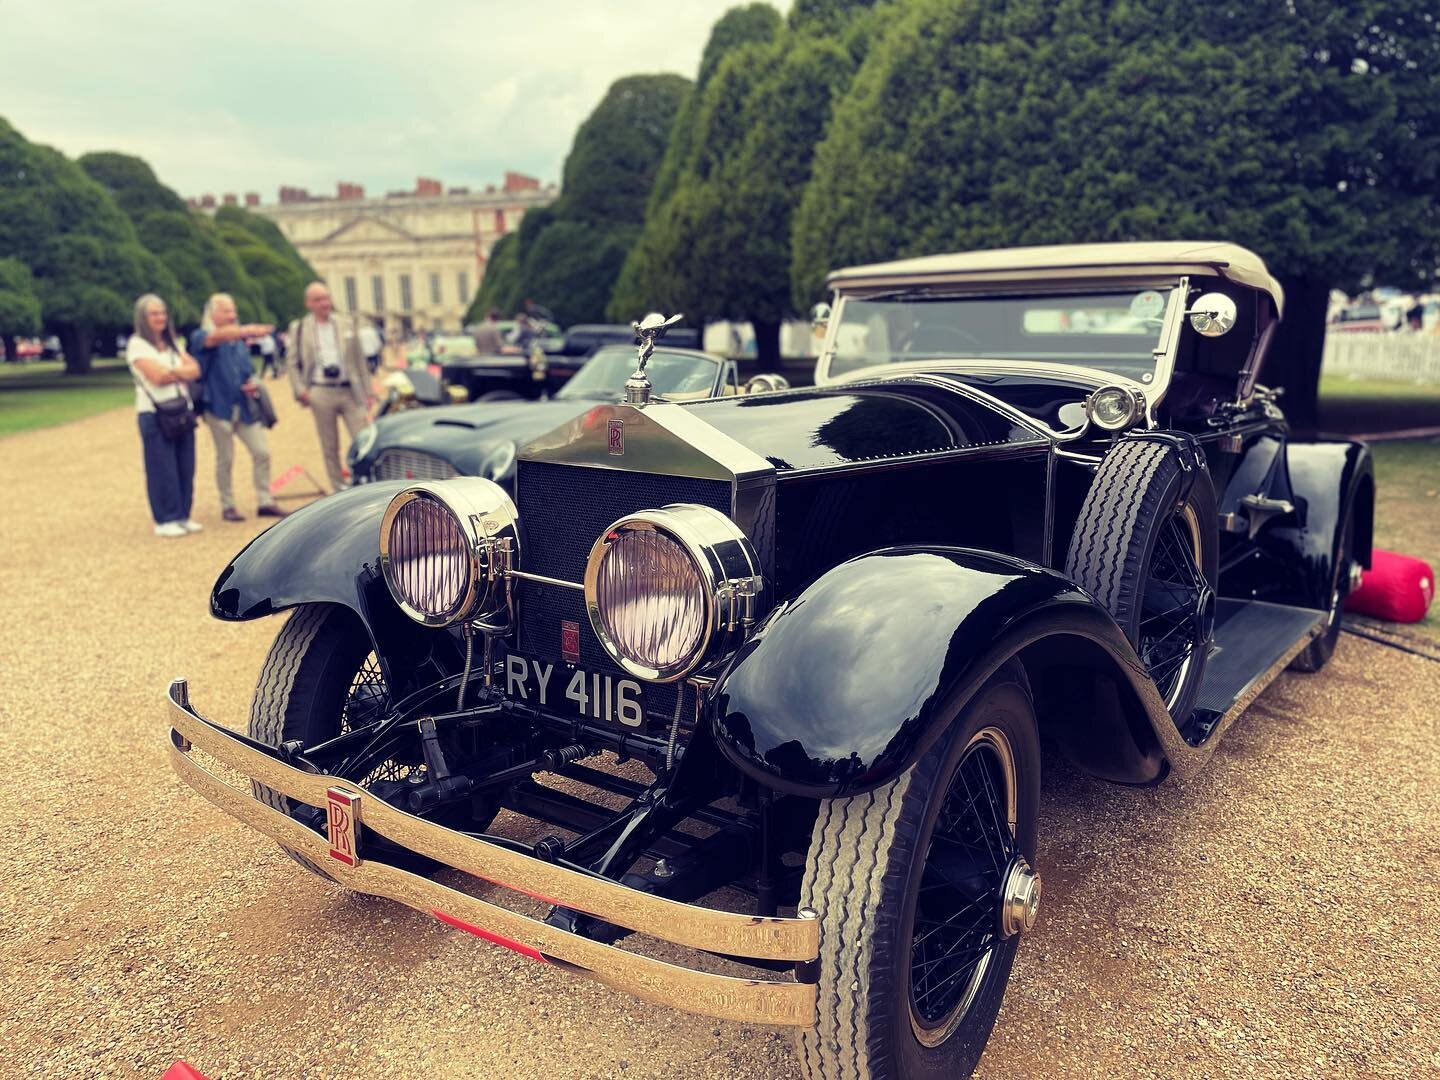 We are delighted to be showing the Rolls Royce Silver Ghost at Hampton Court this weekend. #hamptoncourtpalace #concoursofelegance #rollsroyce #silverghost #akvr_uk #vintage #vintagecar #concours #greatestcarintheworld